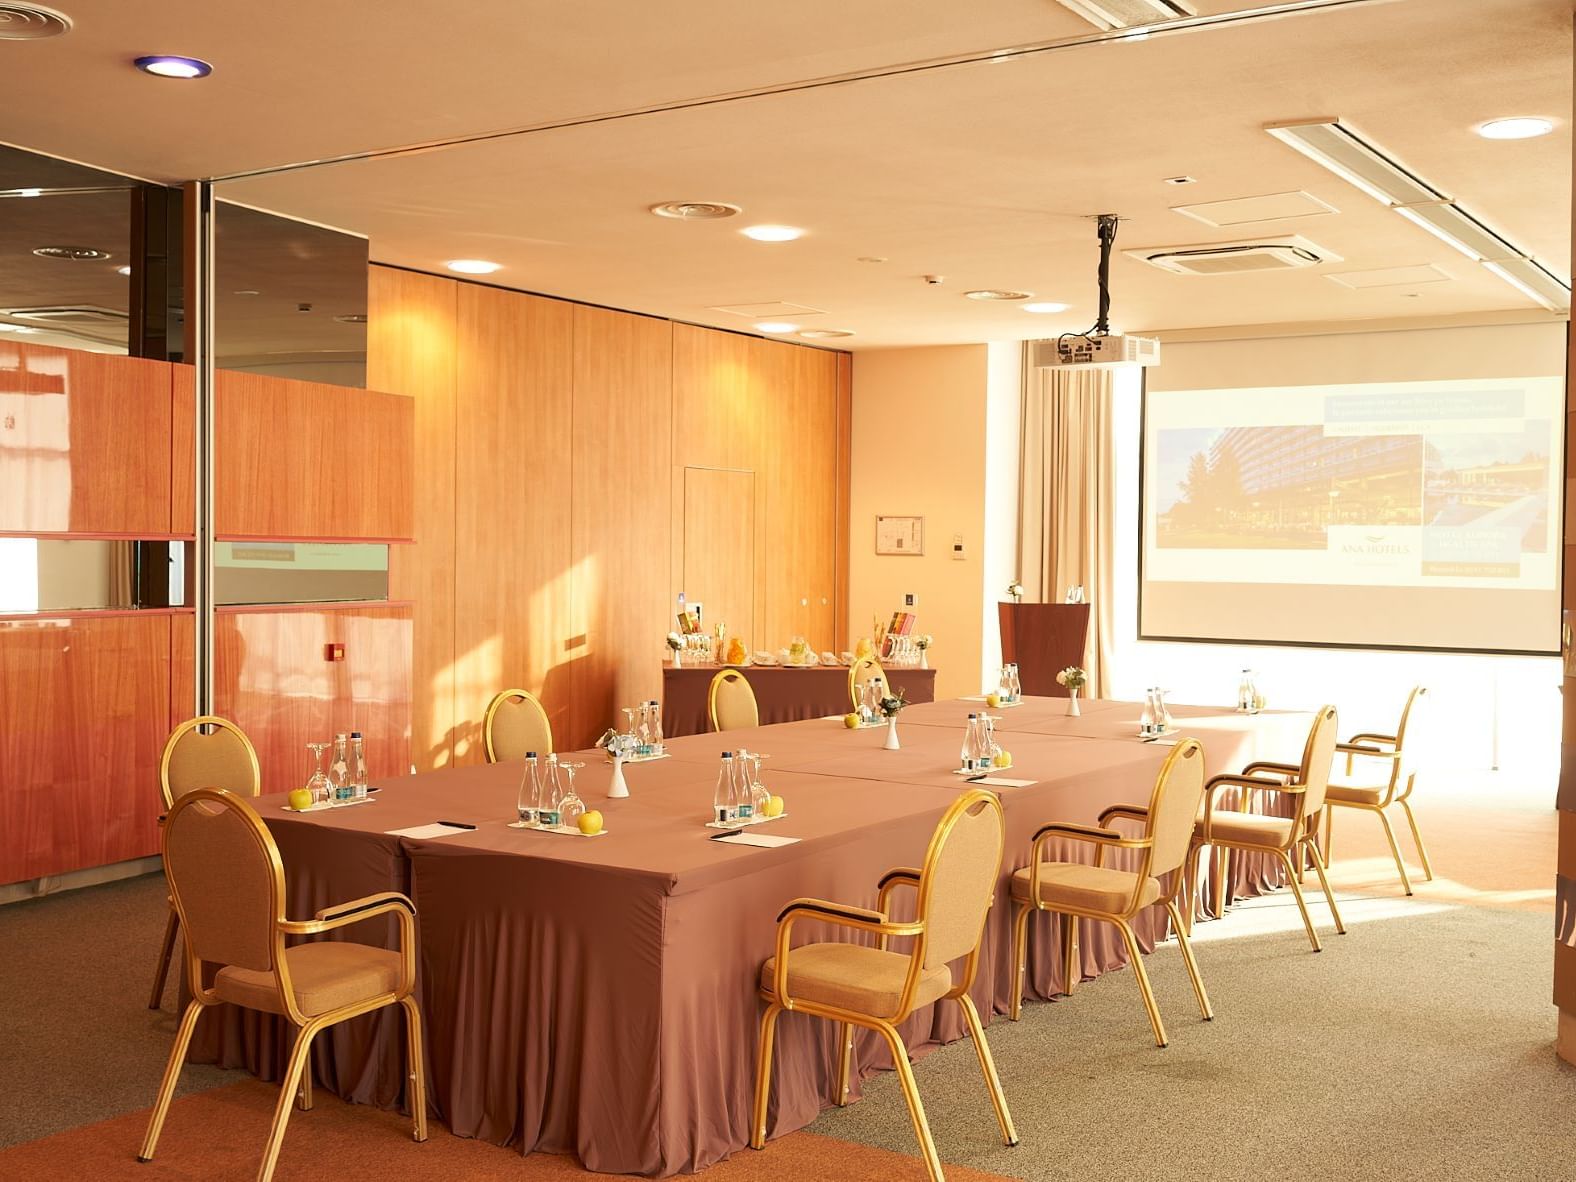 Conference set-up in Urania Room at Ana Hotels Europa